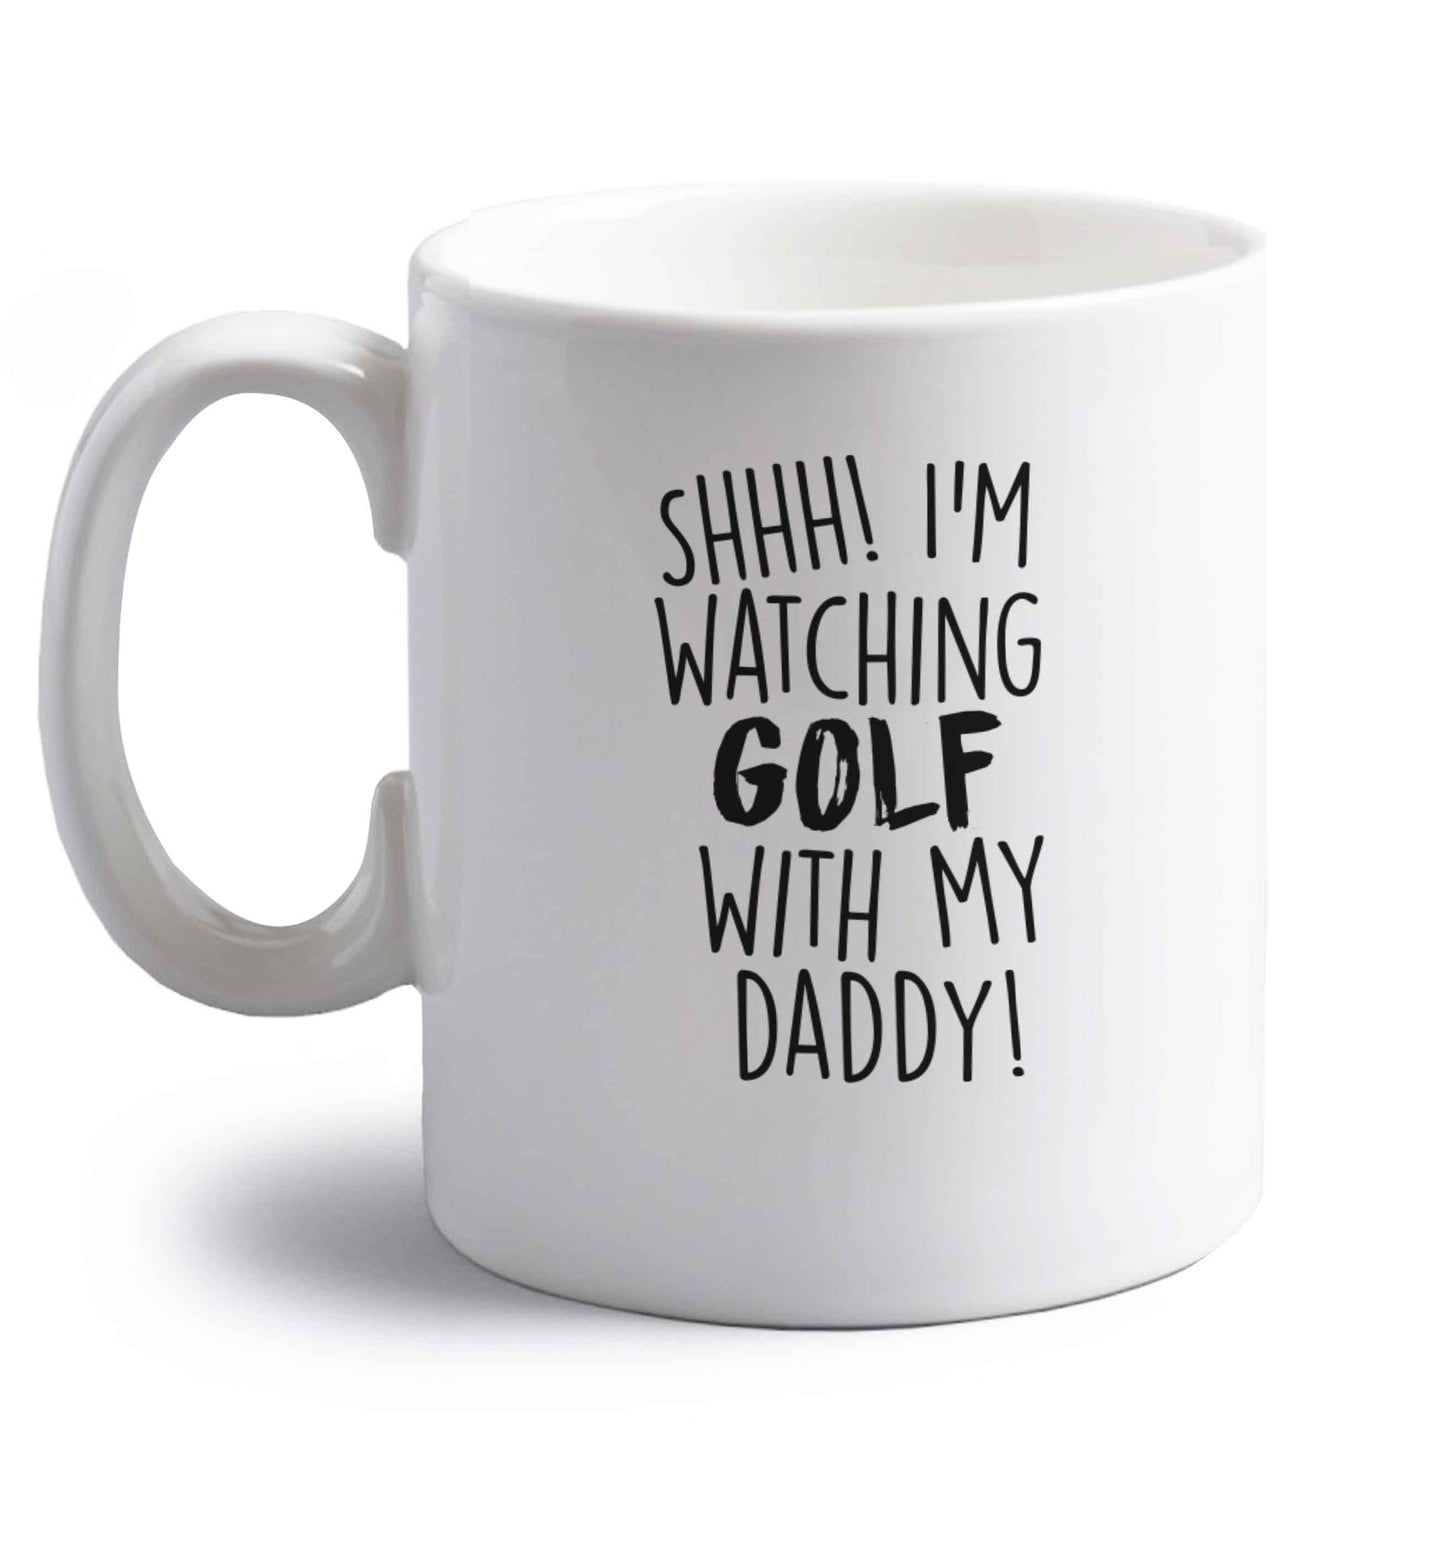 Shh I'm watching golf with my daddy right handed white ceramic mug 